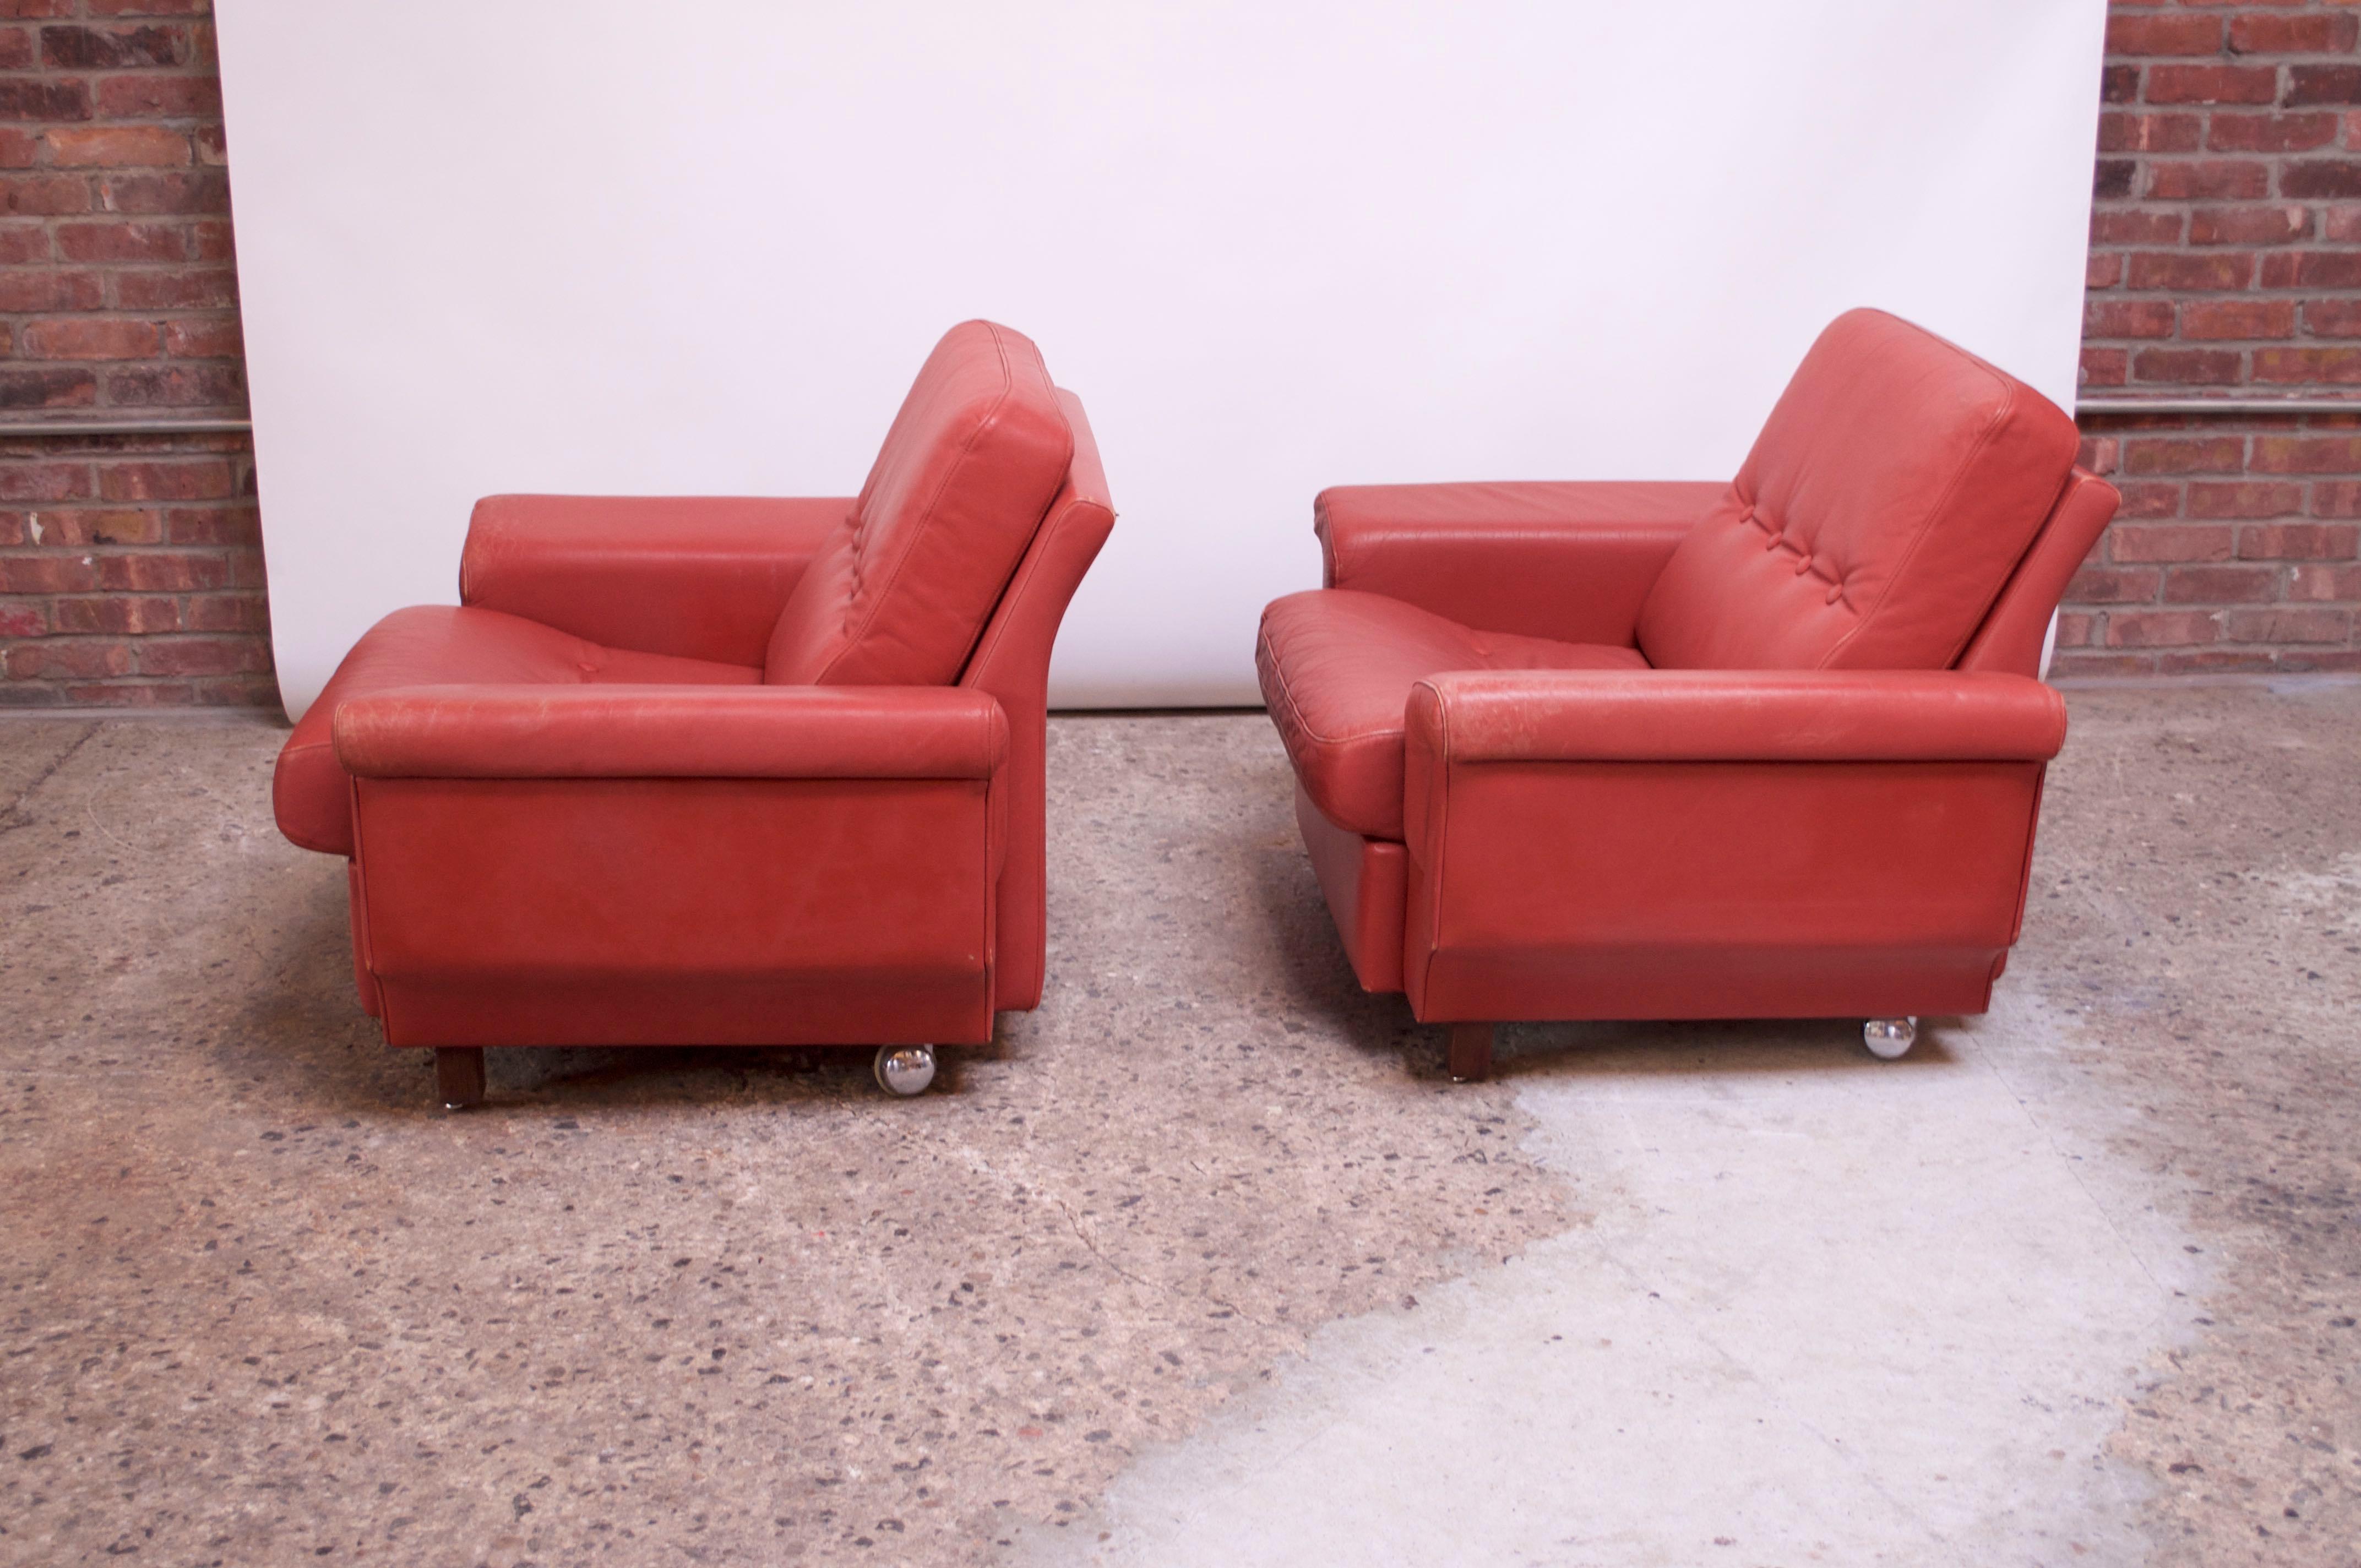 Stained Pair of Danish Modern Lounge Chairs in Cinnabar Leather